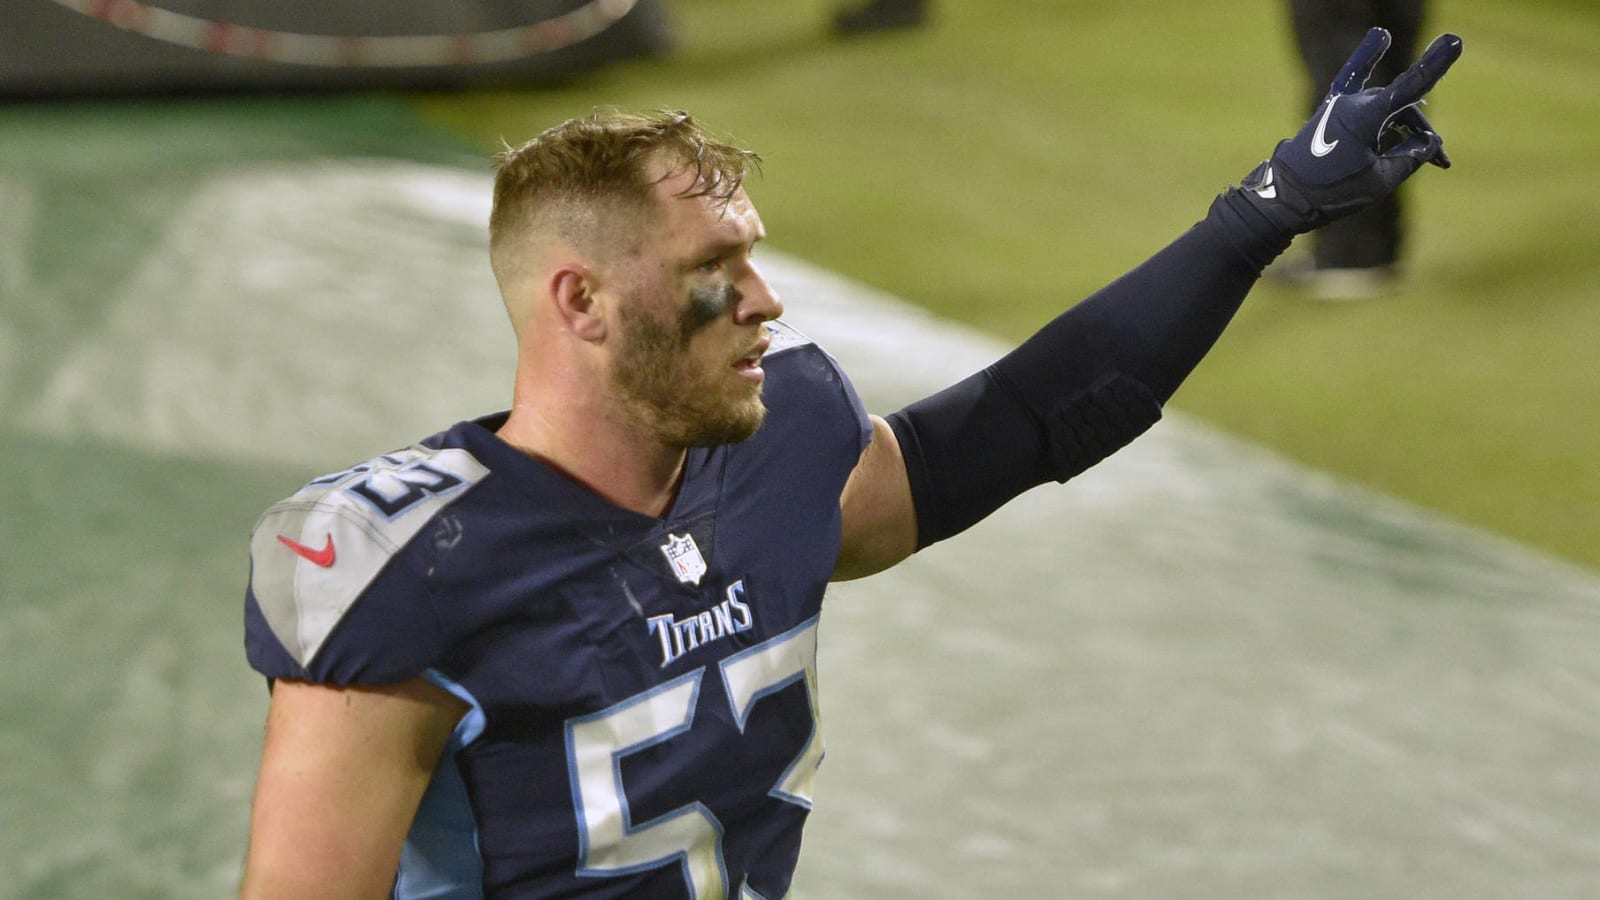 Titans' Will Compton got roasted for new haircut